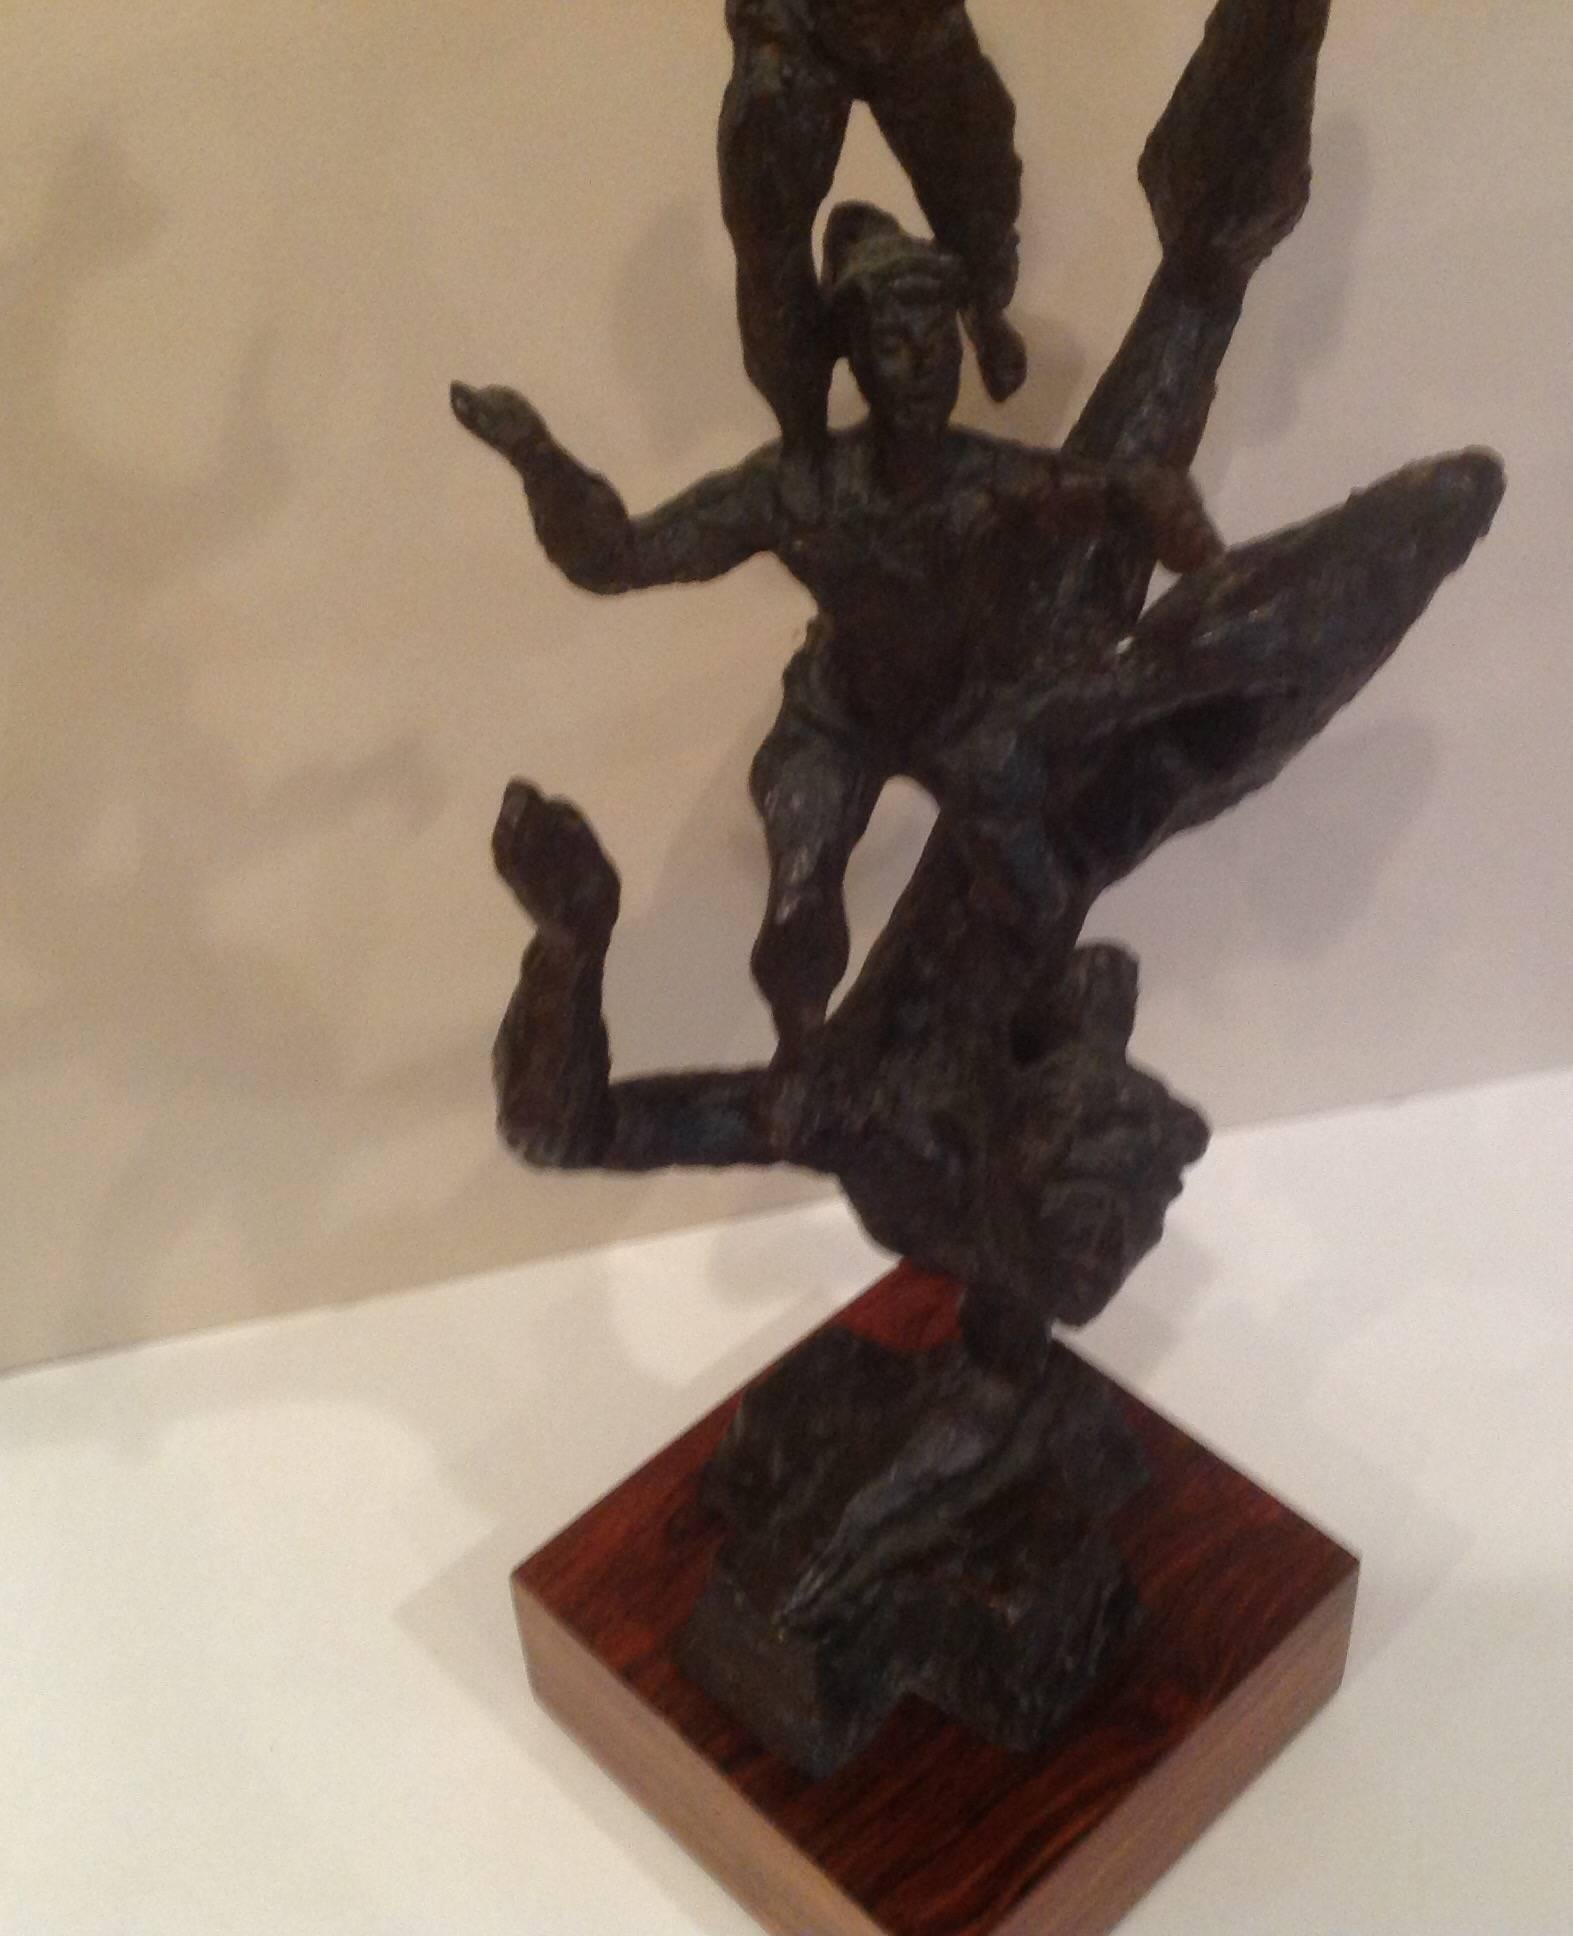 Signed Monumental Chaim Gross Acrobat Sculpture with Original Rotating Stand 2